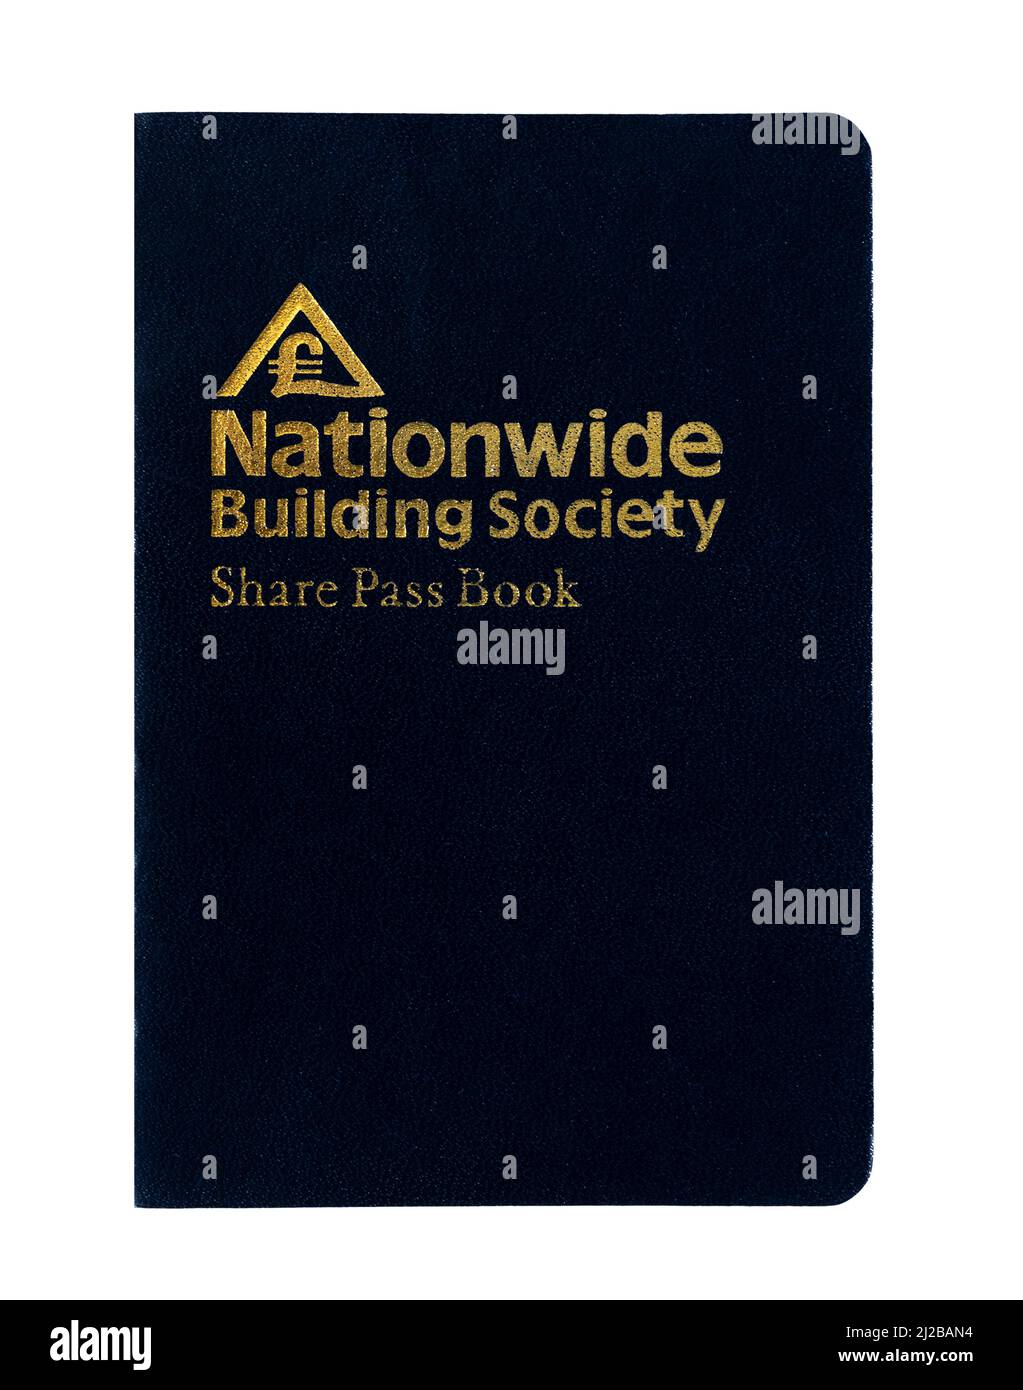 Cover of a share passbook for the Nationwide Building Society opened in 1983 Stock Photo